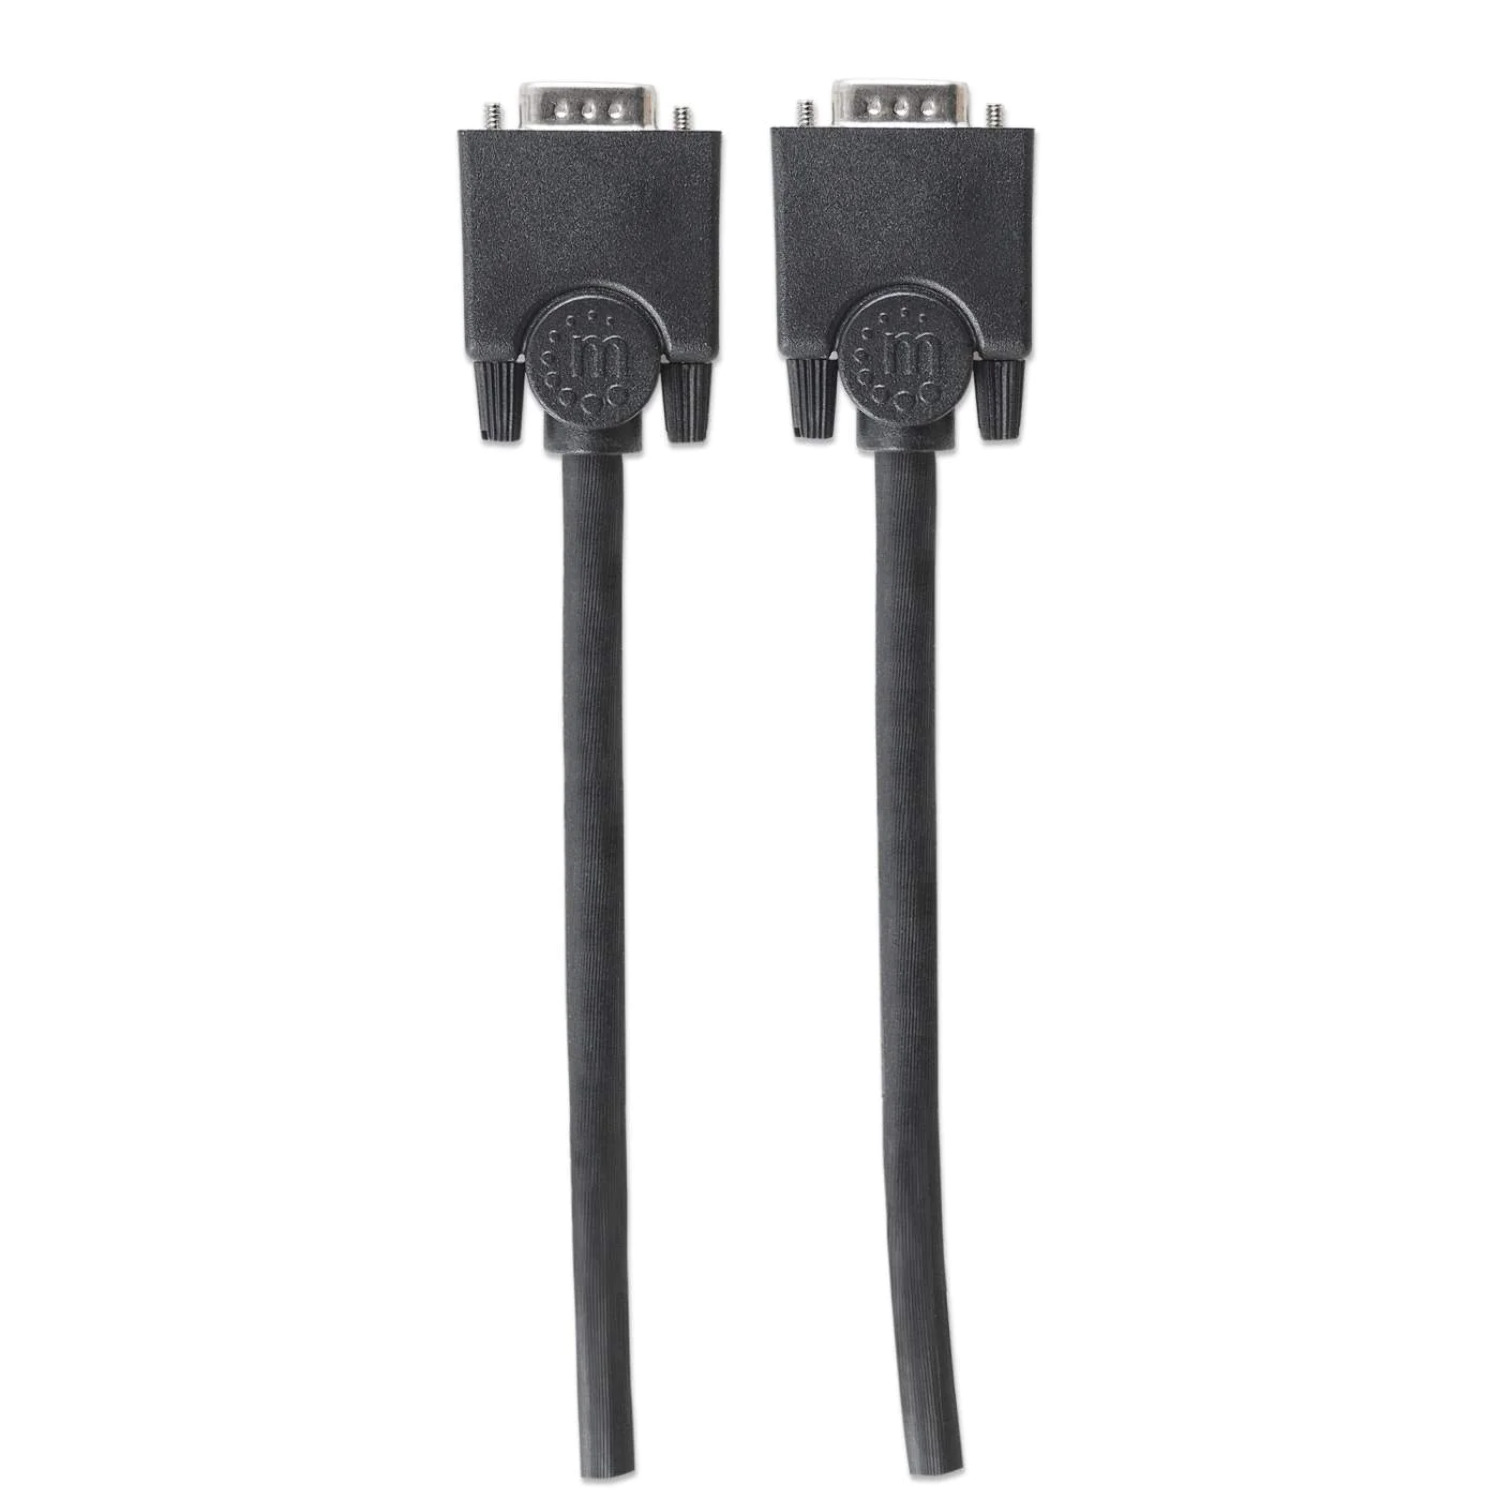 Manhattan SVGA Monitor Cable, HD15 Male to HD15 Male, 6 ft., Black - Lifetime Warranty - image 5 of 6